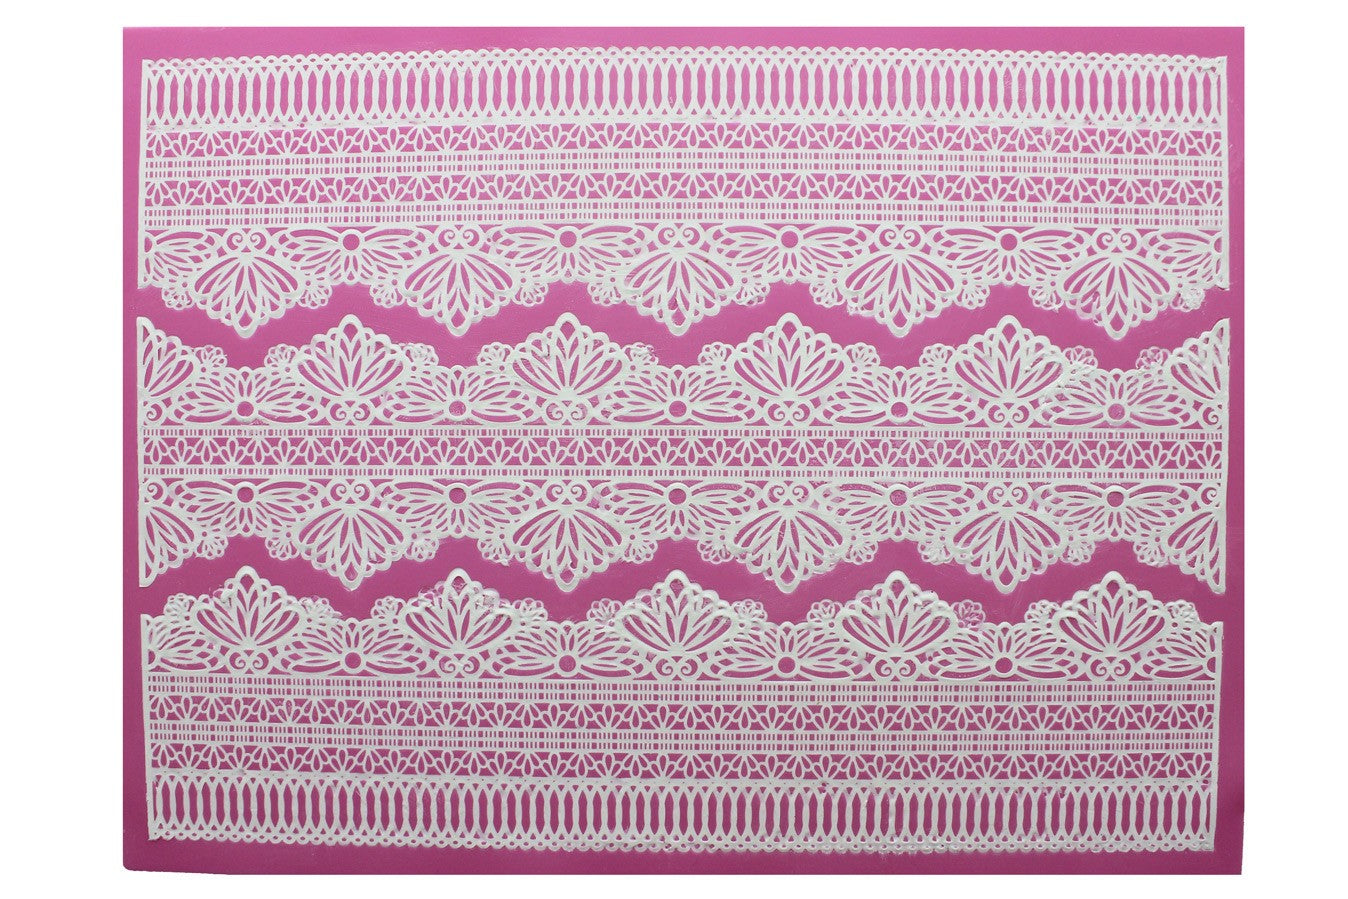 Claire Bowman Cake Lace Mat Serenity - The Cooks Cupboard Ltd